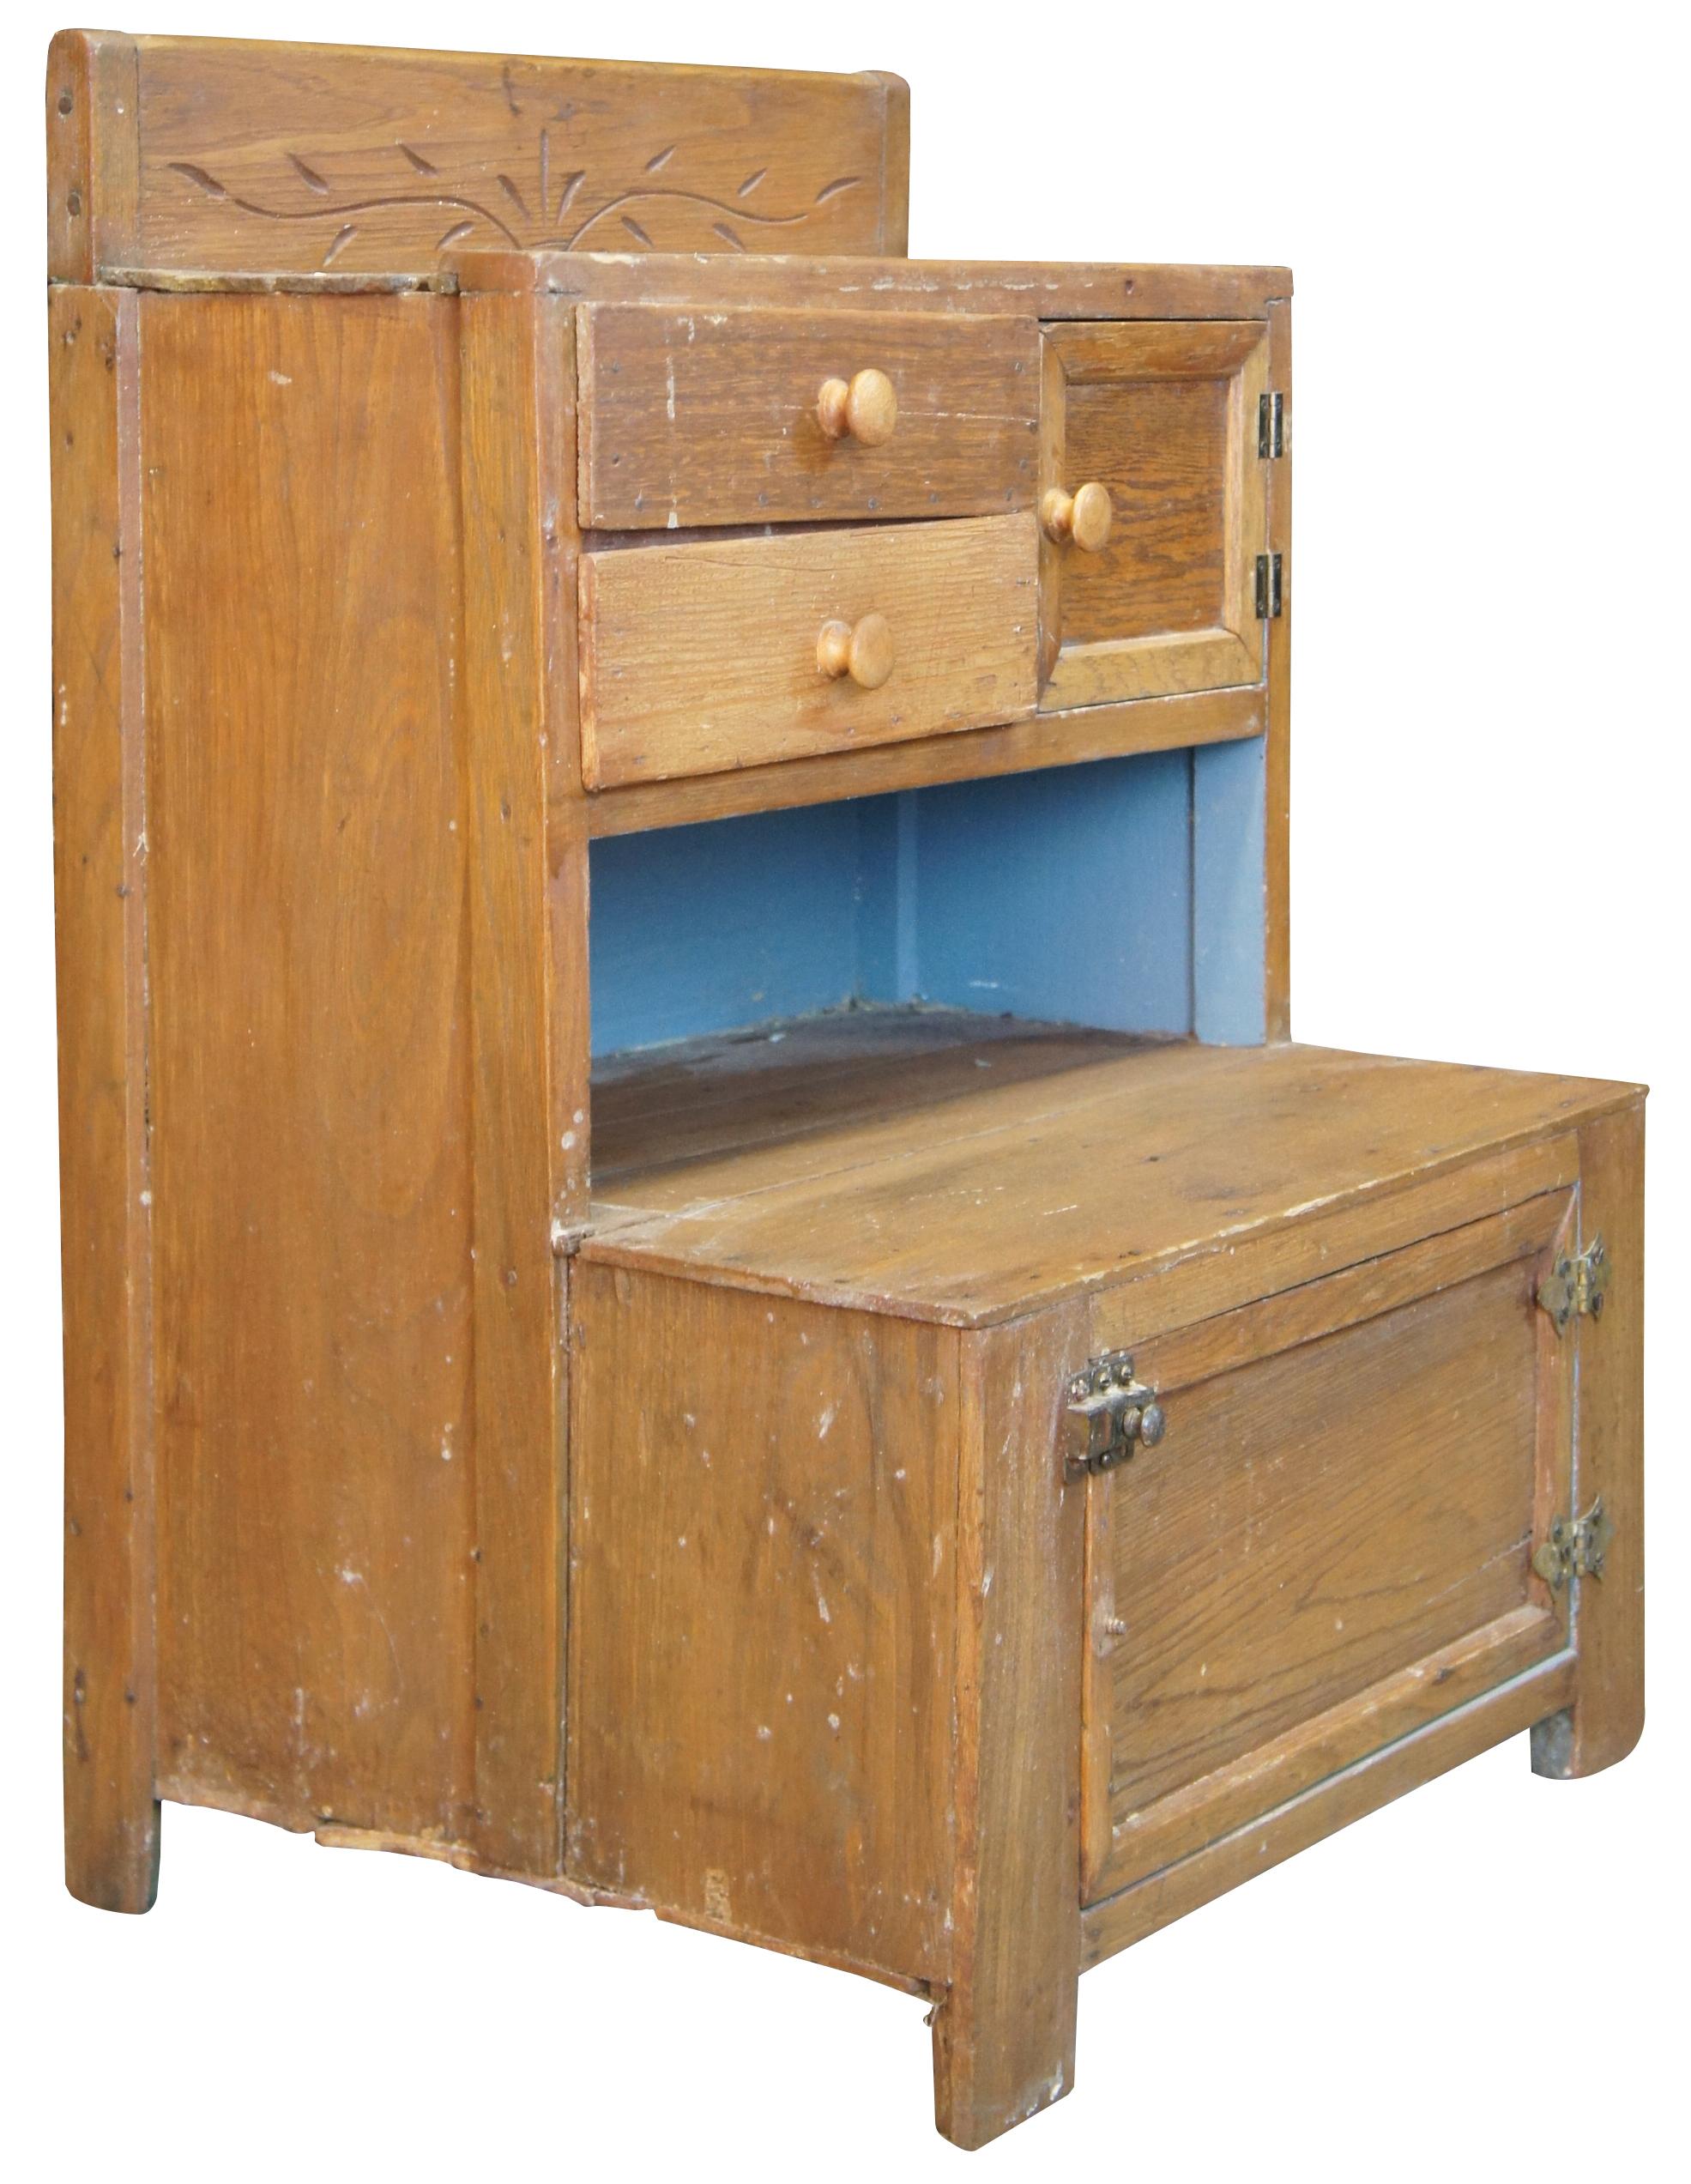 Early 20th century late Victorian American Oak child's stepback cupboard. Features an engraved backsplash, blue interior, brass hardware, two drawers and 2 cabinets for storage. Measure: 25